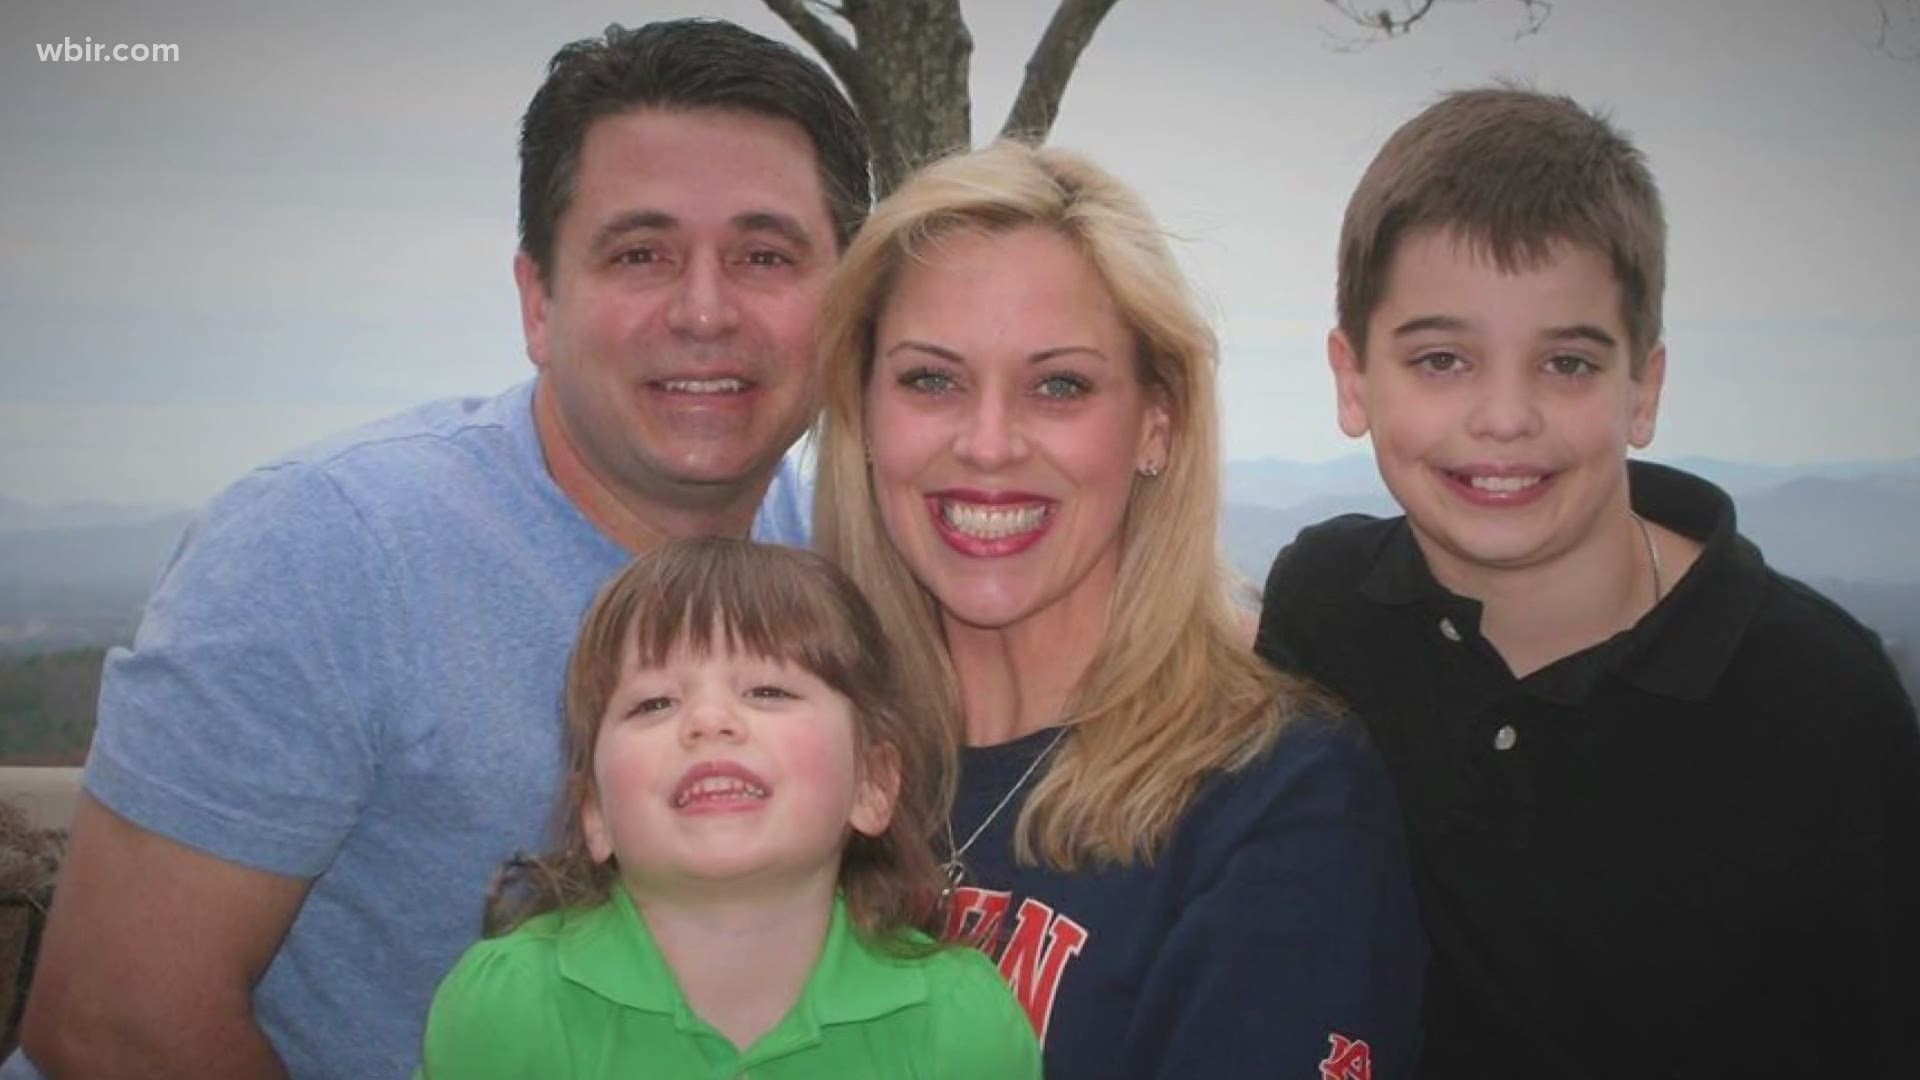 In less than 2 weeks, this 46-year-old father of two went from healthy to fighting for his life.